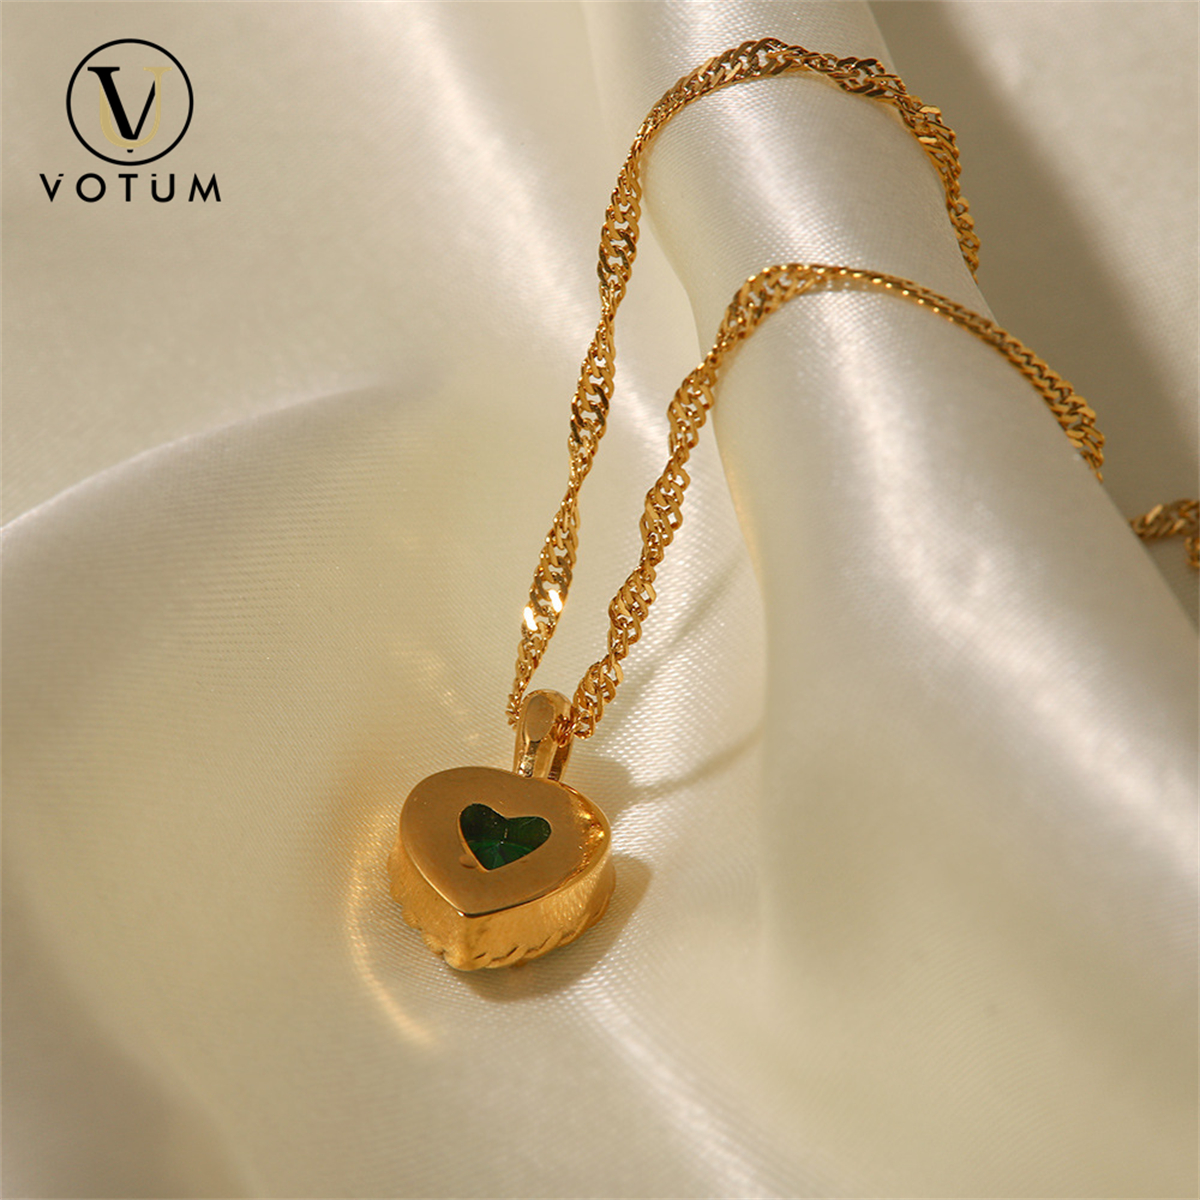 Votum Wholesale Natural Crystal Heart Pendant Chain Necklace with Semi Gemstone 925 Sterling Silver 18K Gold Plated Custom Fine Jewelry Jewellery Accessories